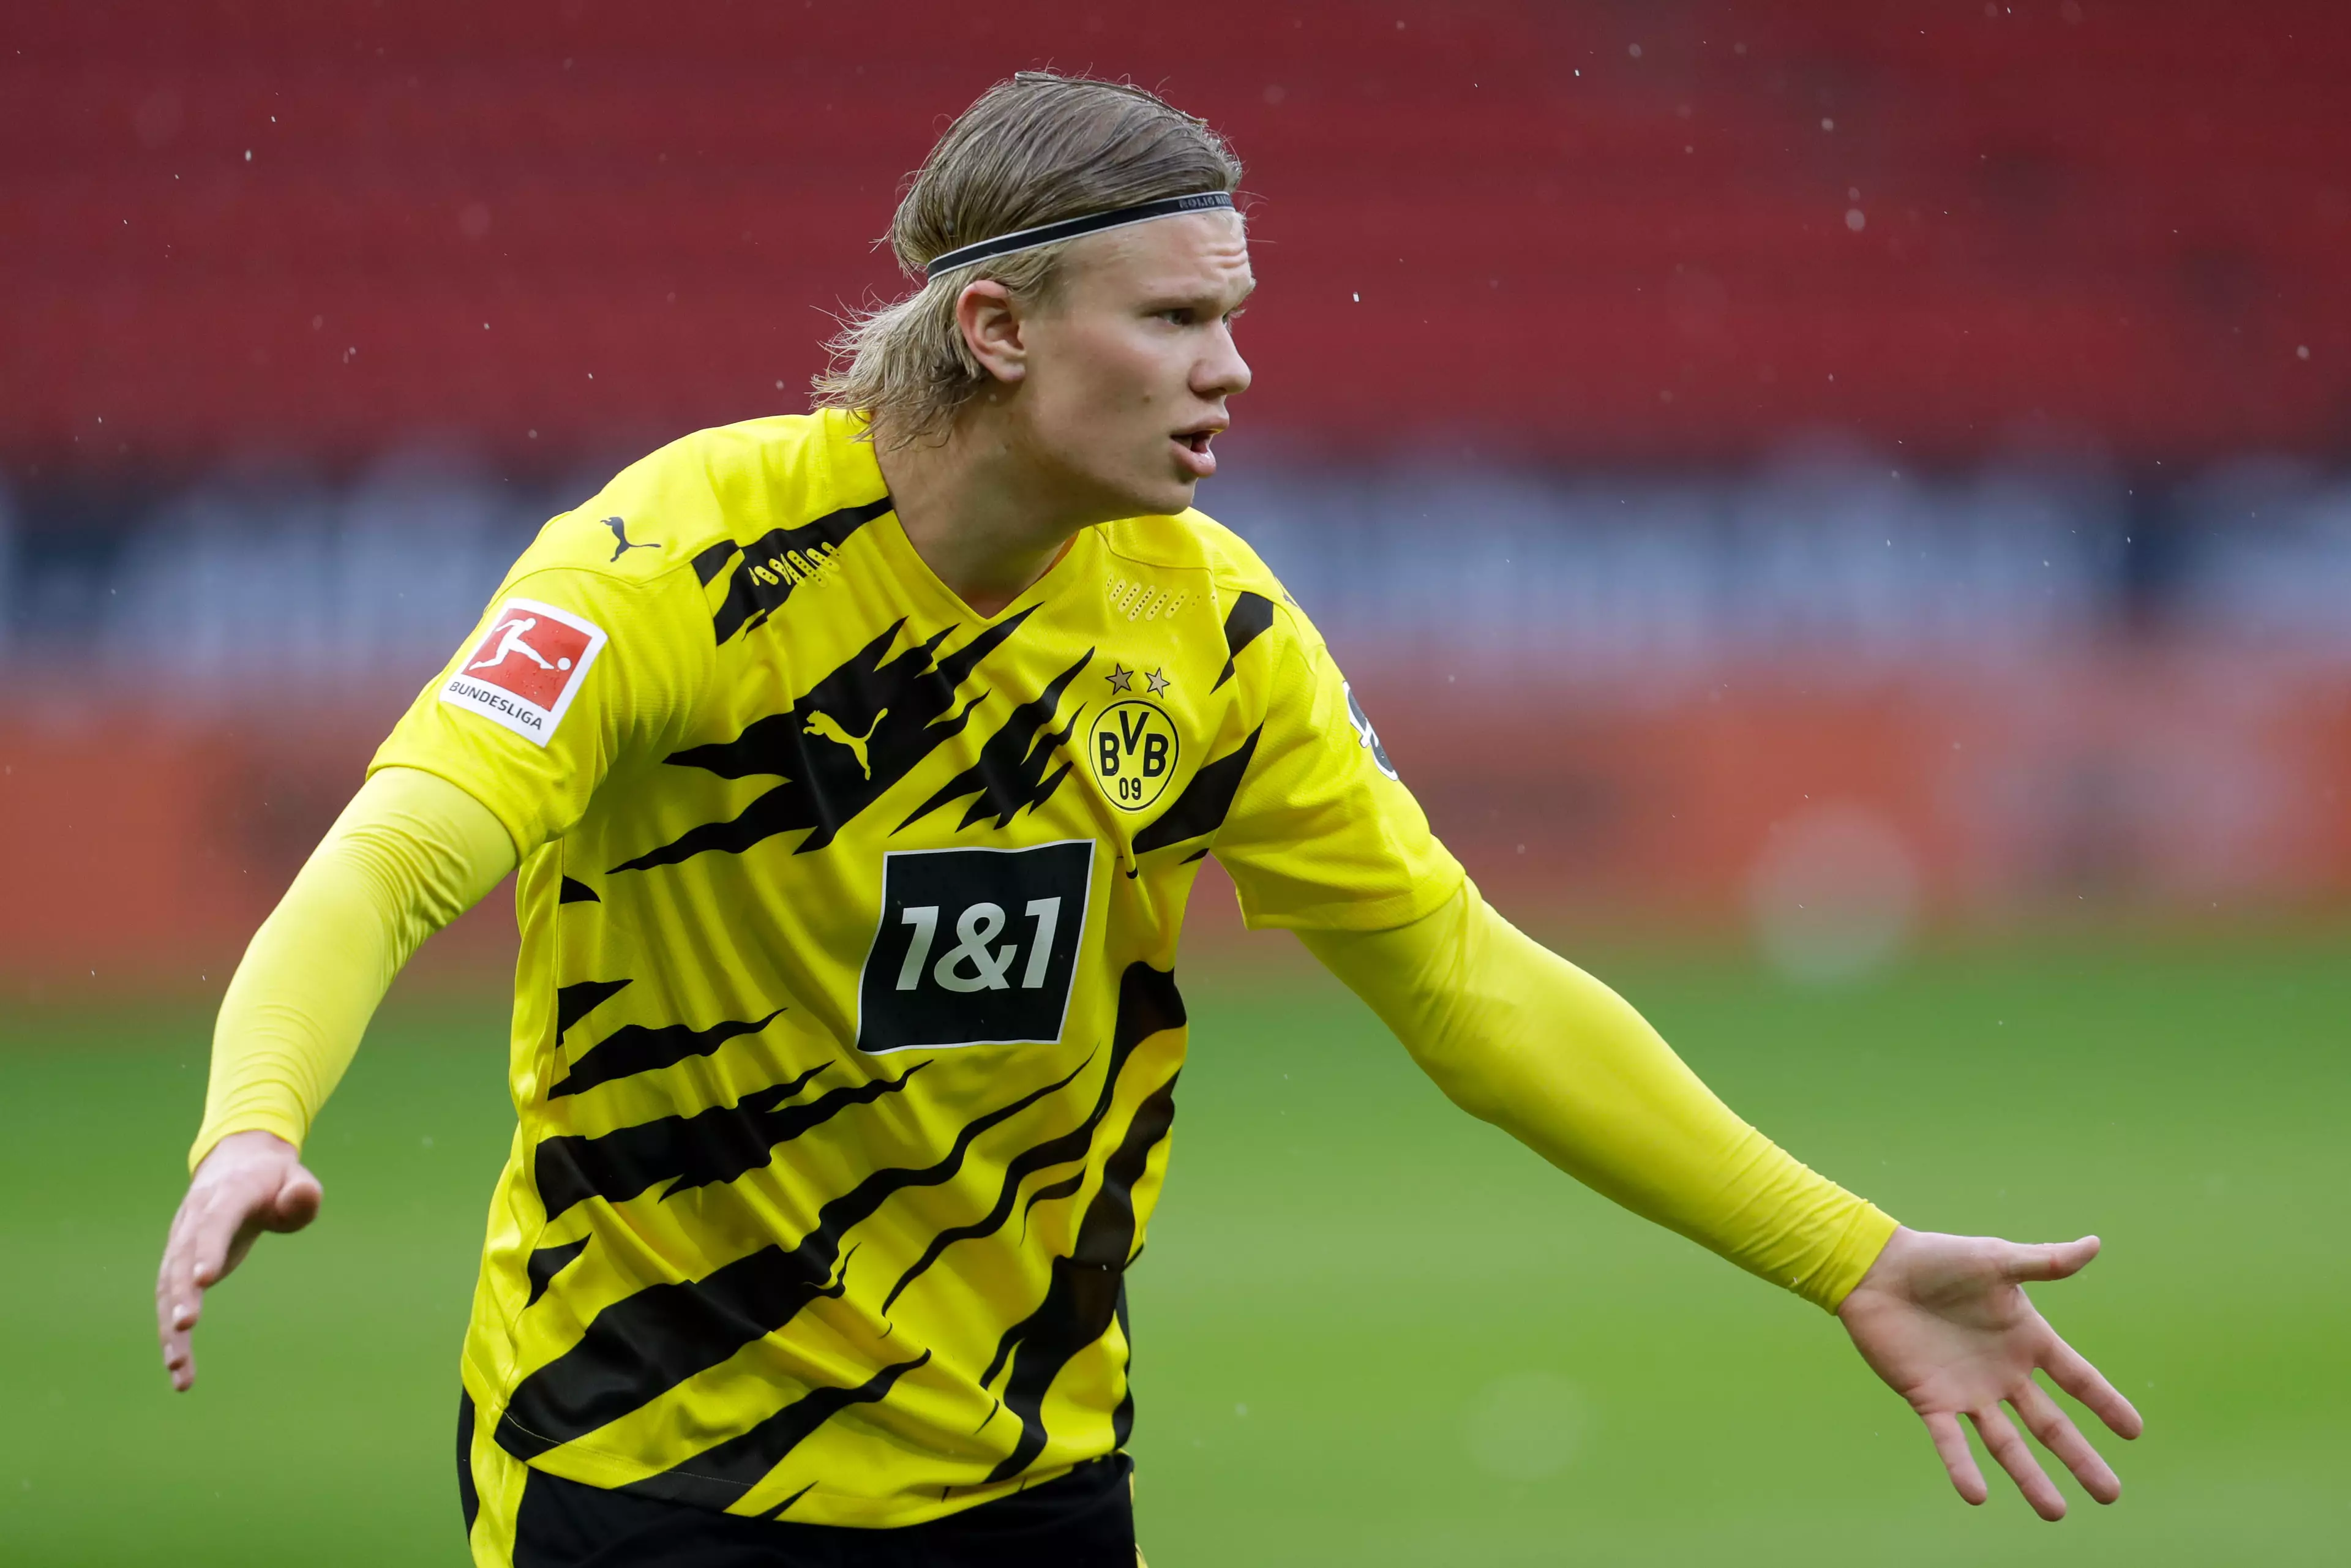 Erling Haaland's situation at Borussia Dortmund is being monitored by some of the biggest clubs in Europe